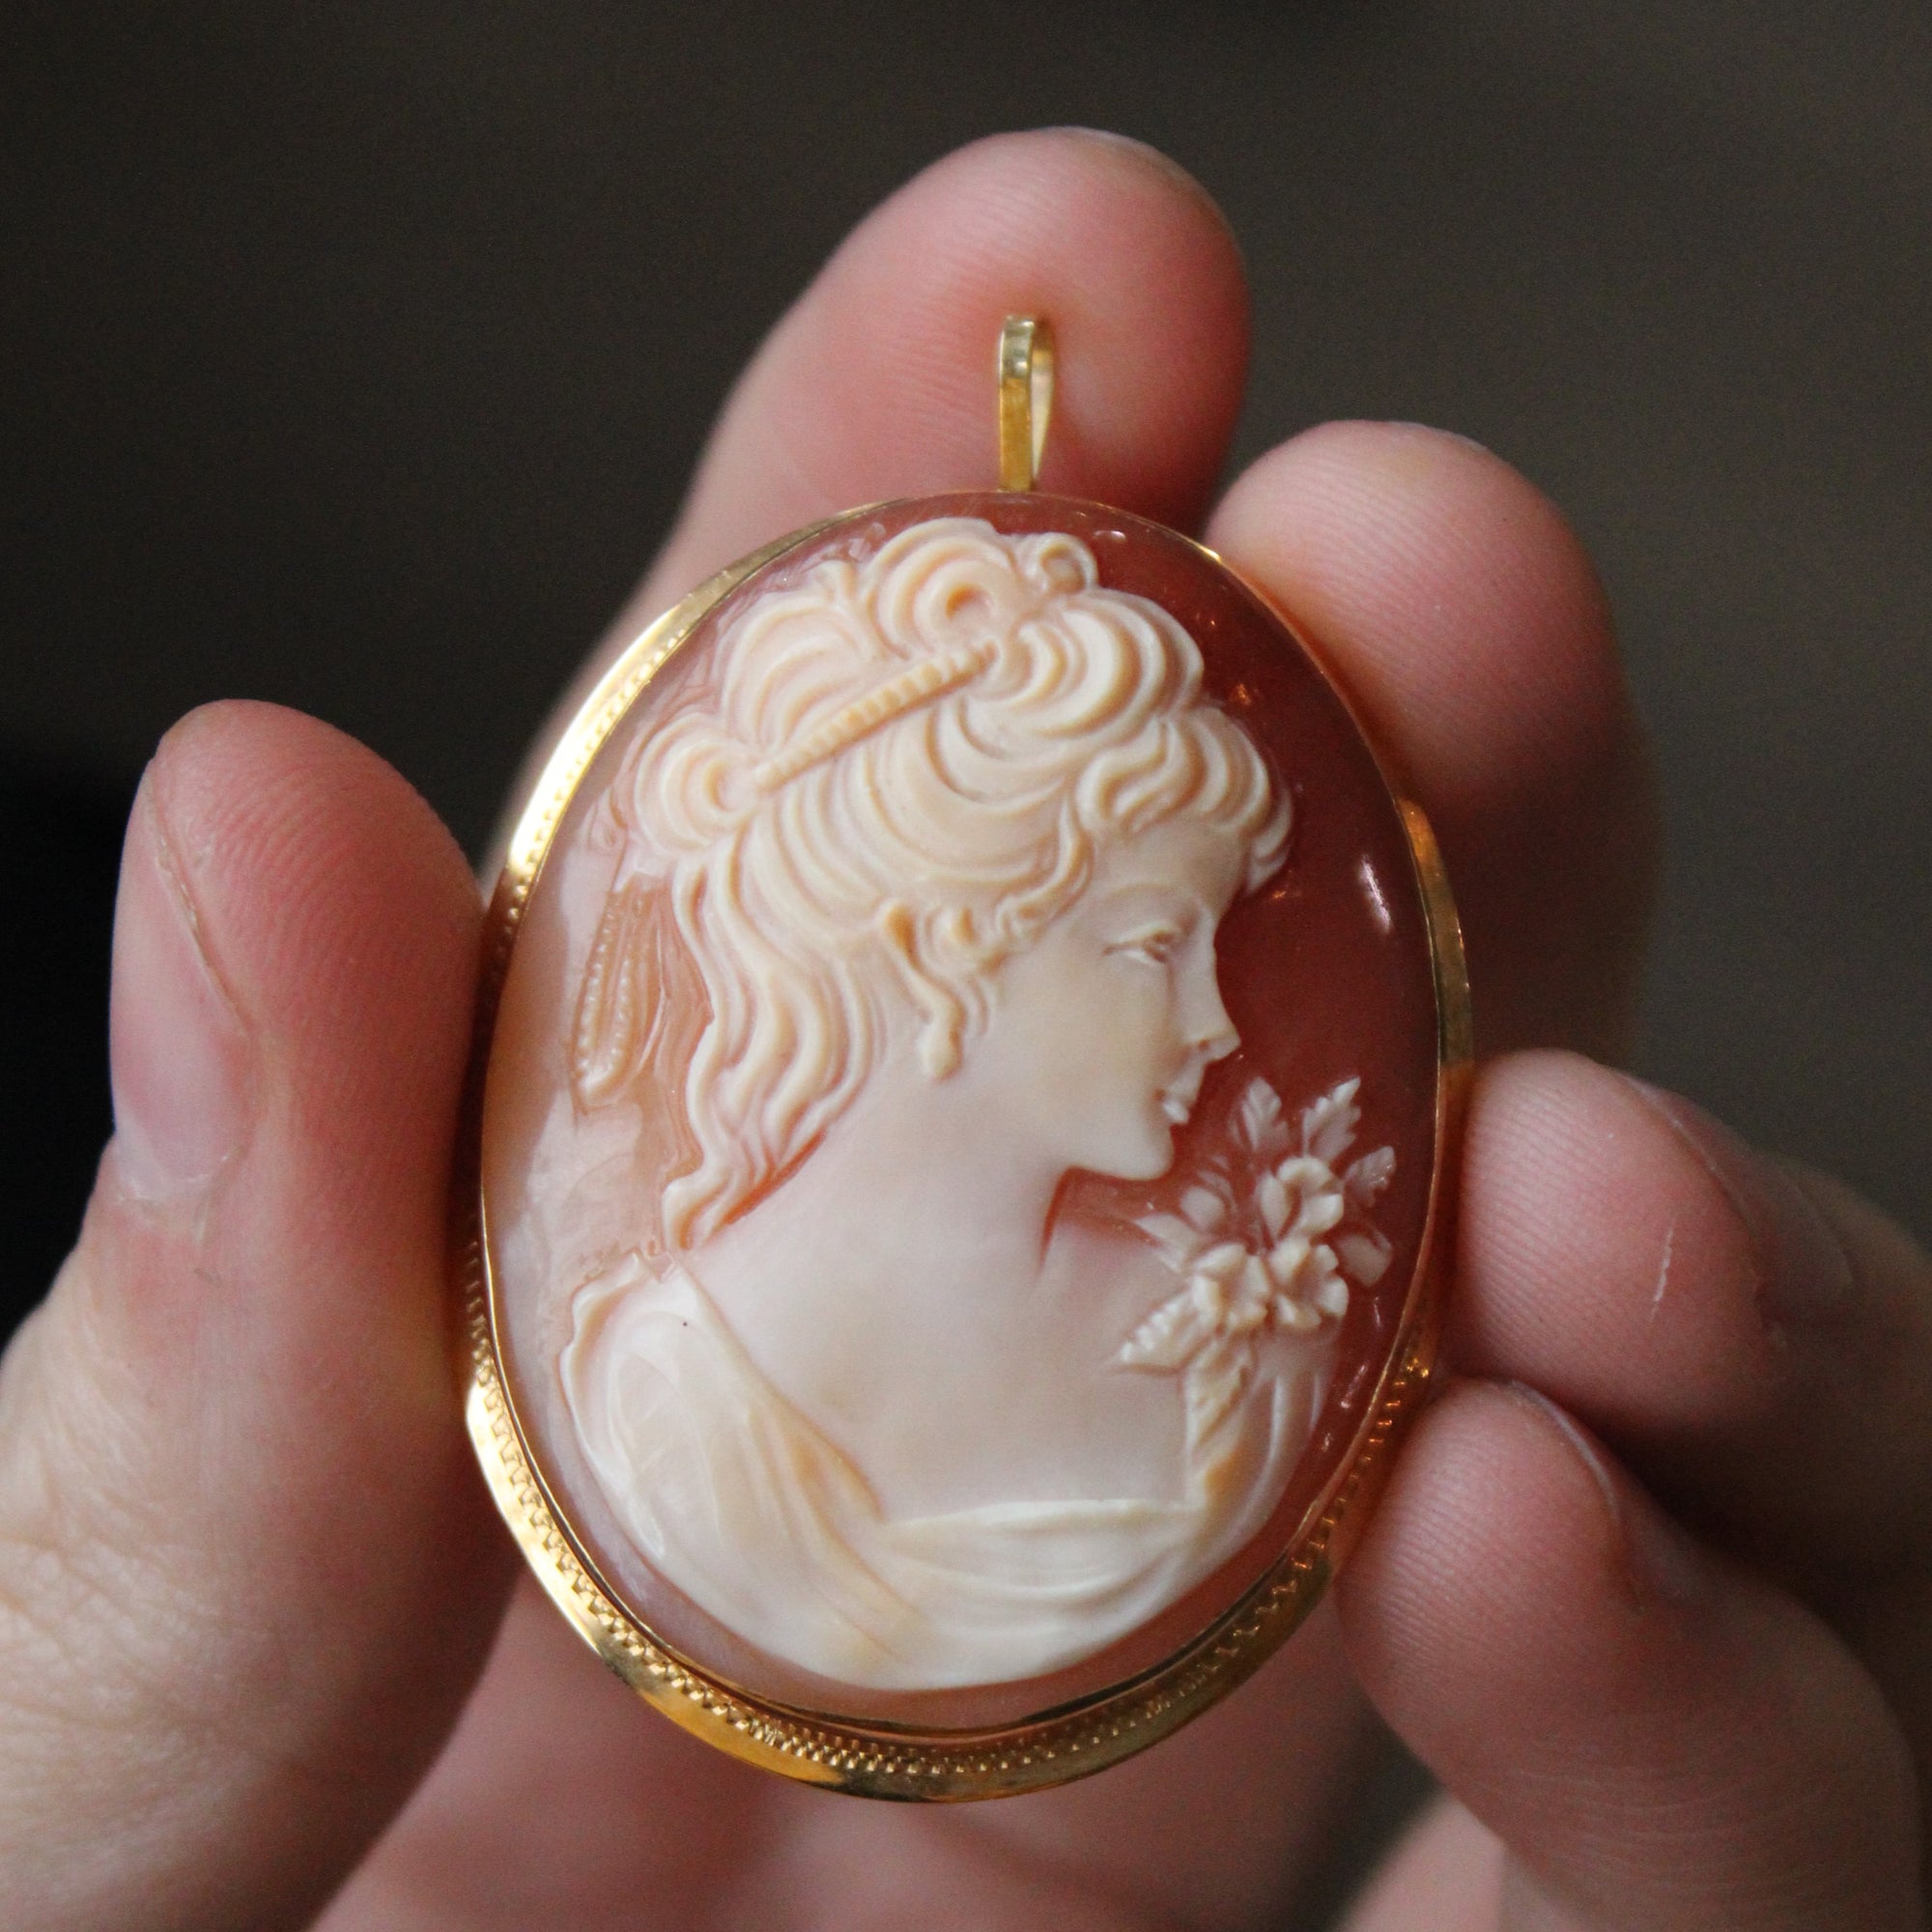 Carved Shell Cameo Pendant | 20.00ct |